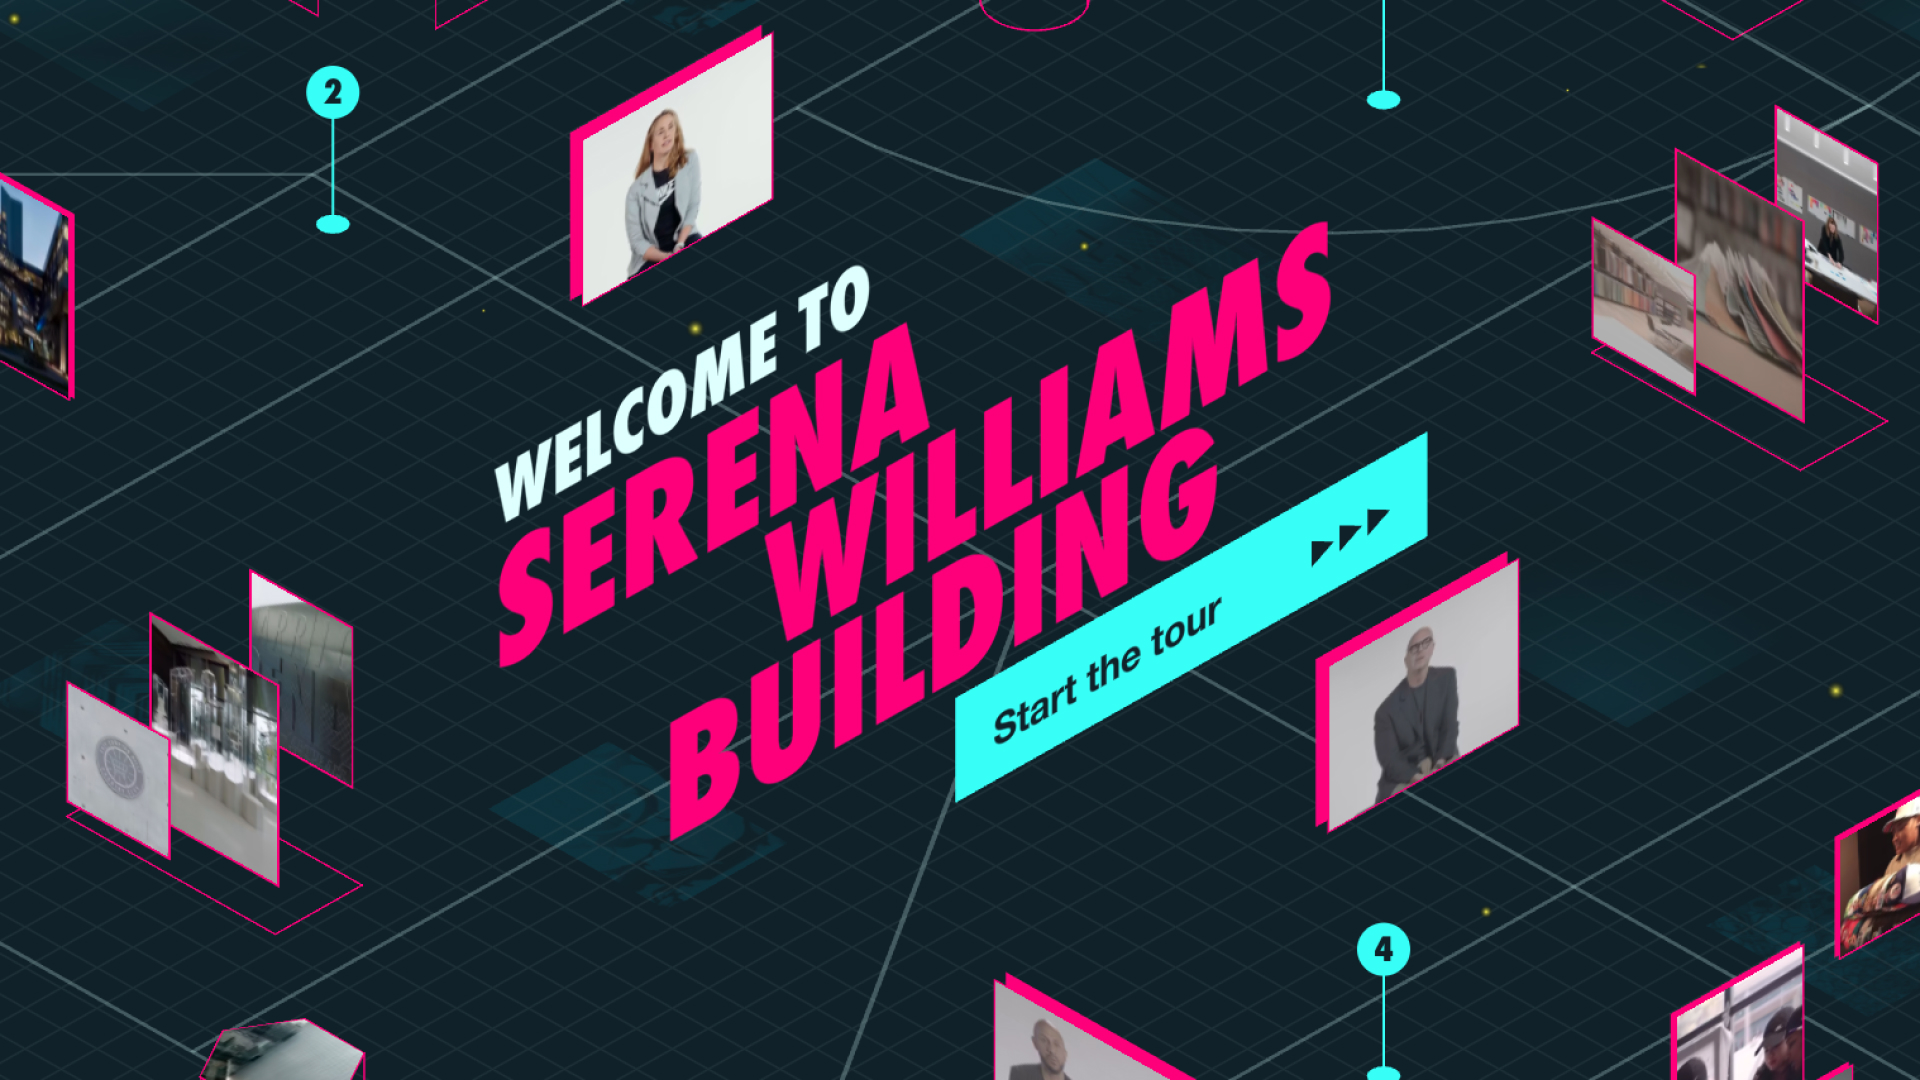 Nike HQ's newest, largest structure: the Serena Williams Building